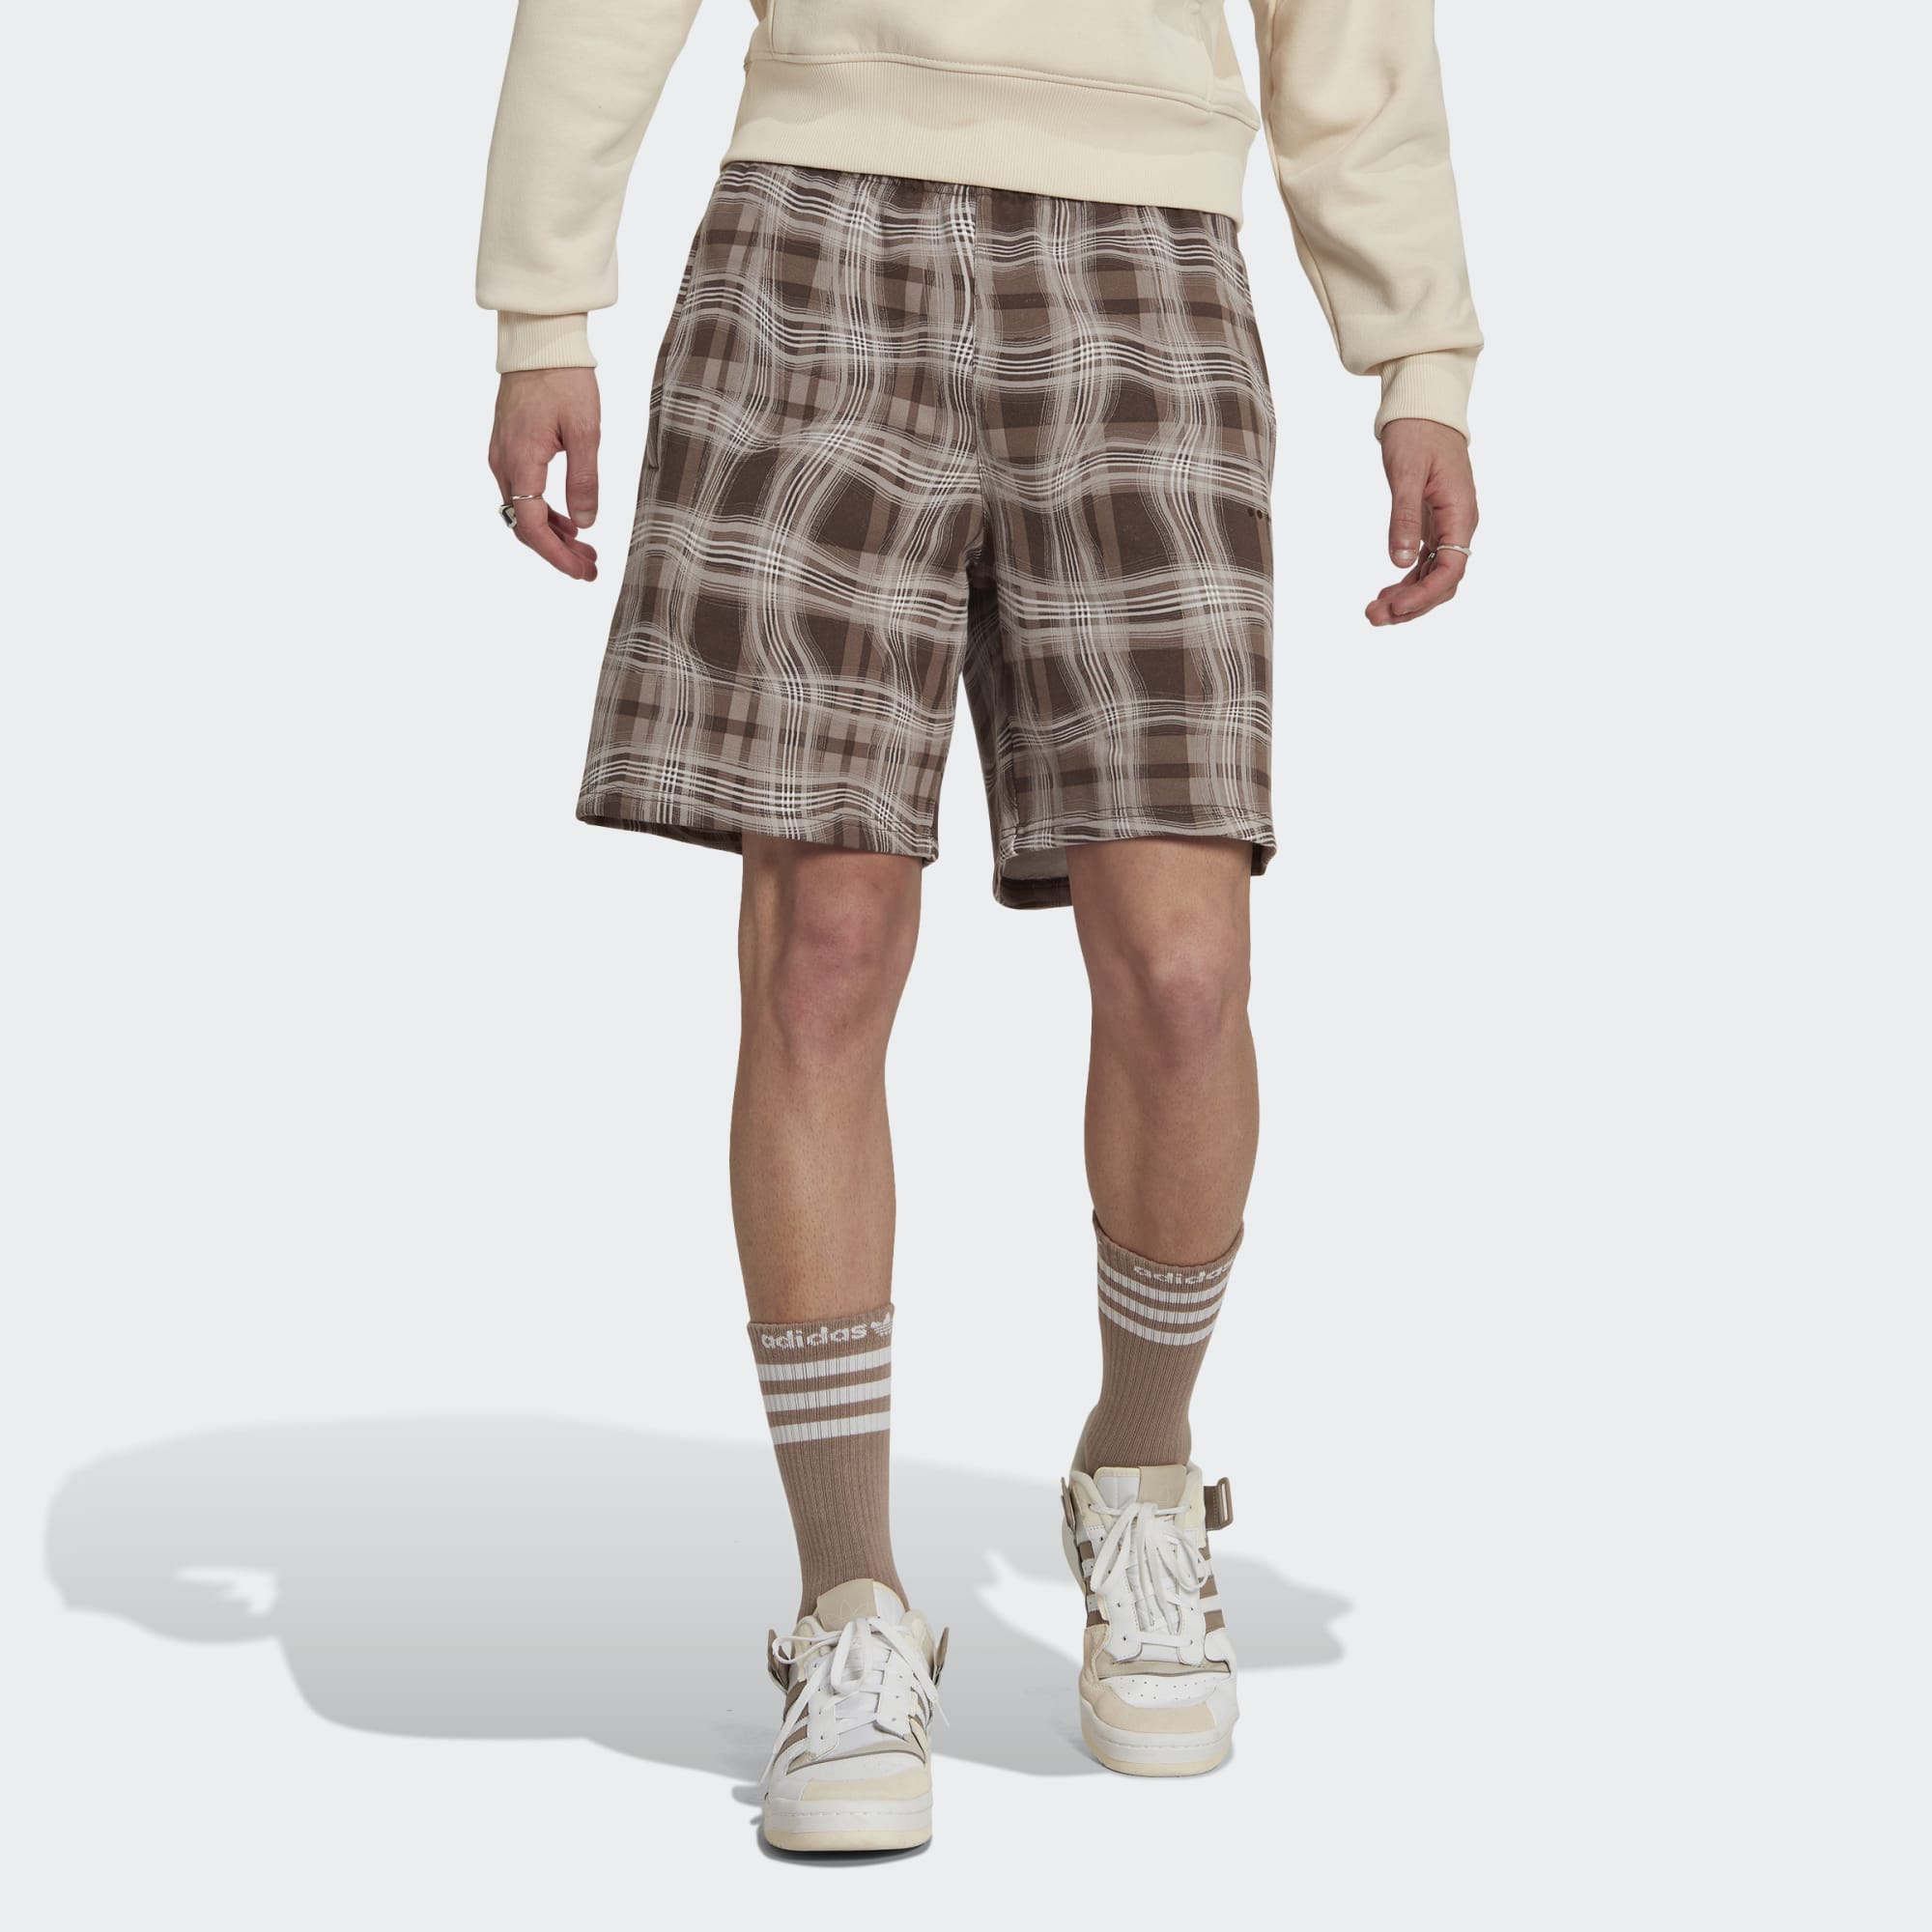 Adidas AOP Plaid Short Chalky Reds - Brown Puffer